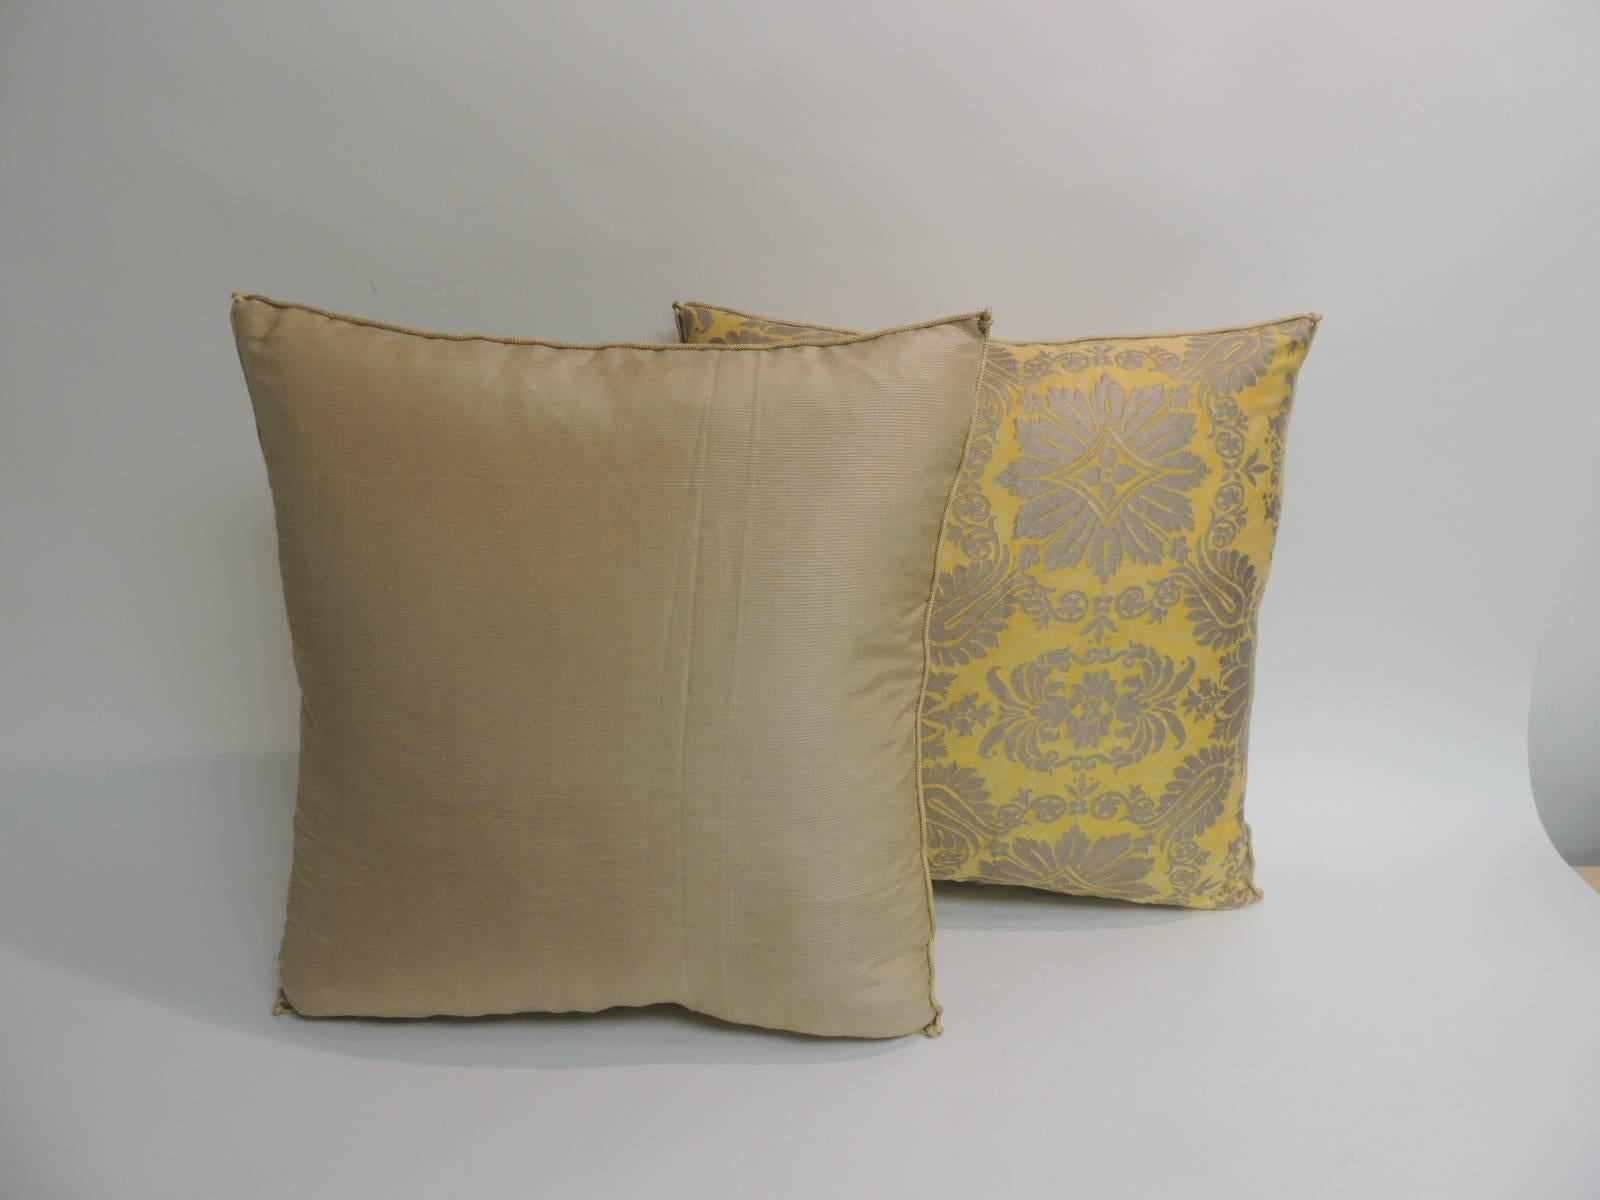 Italian Pair of Vintage Yellow and Gold Floral Fortuny Decorative Pillows